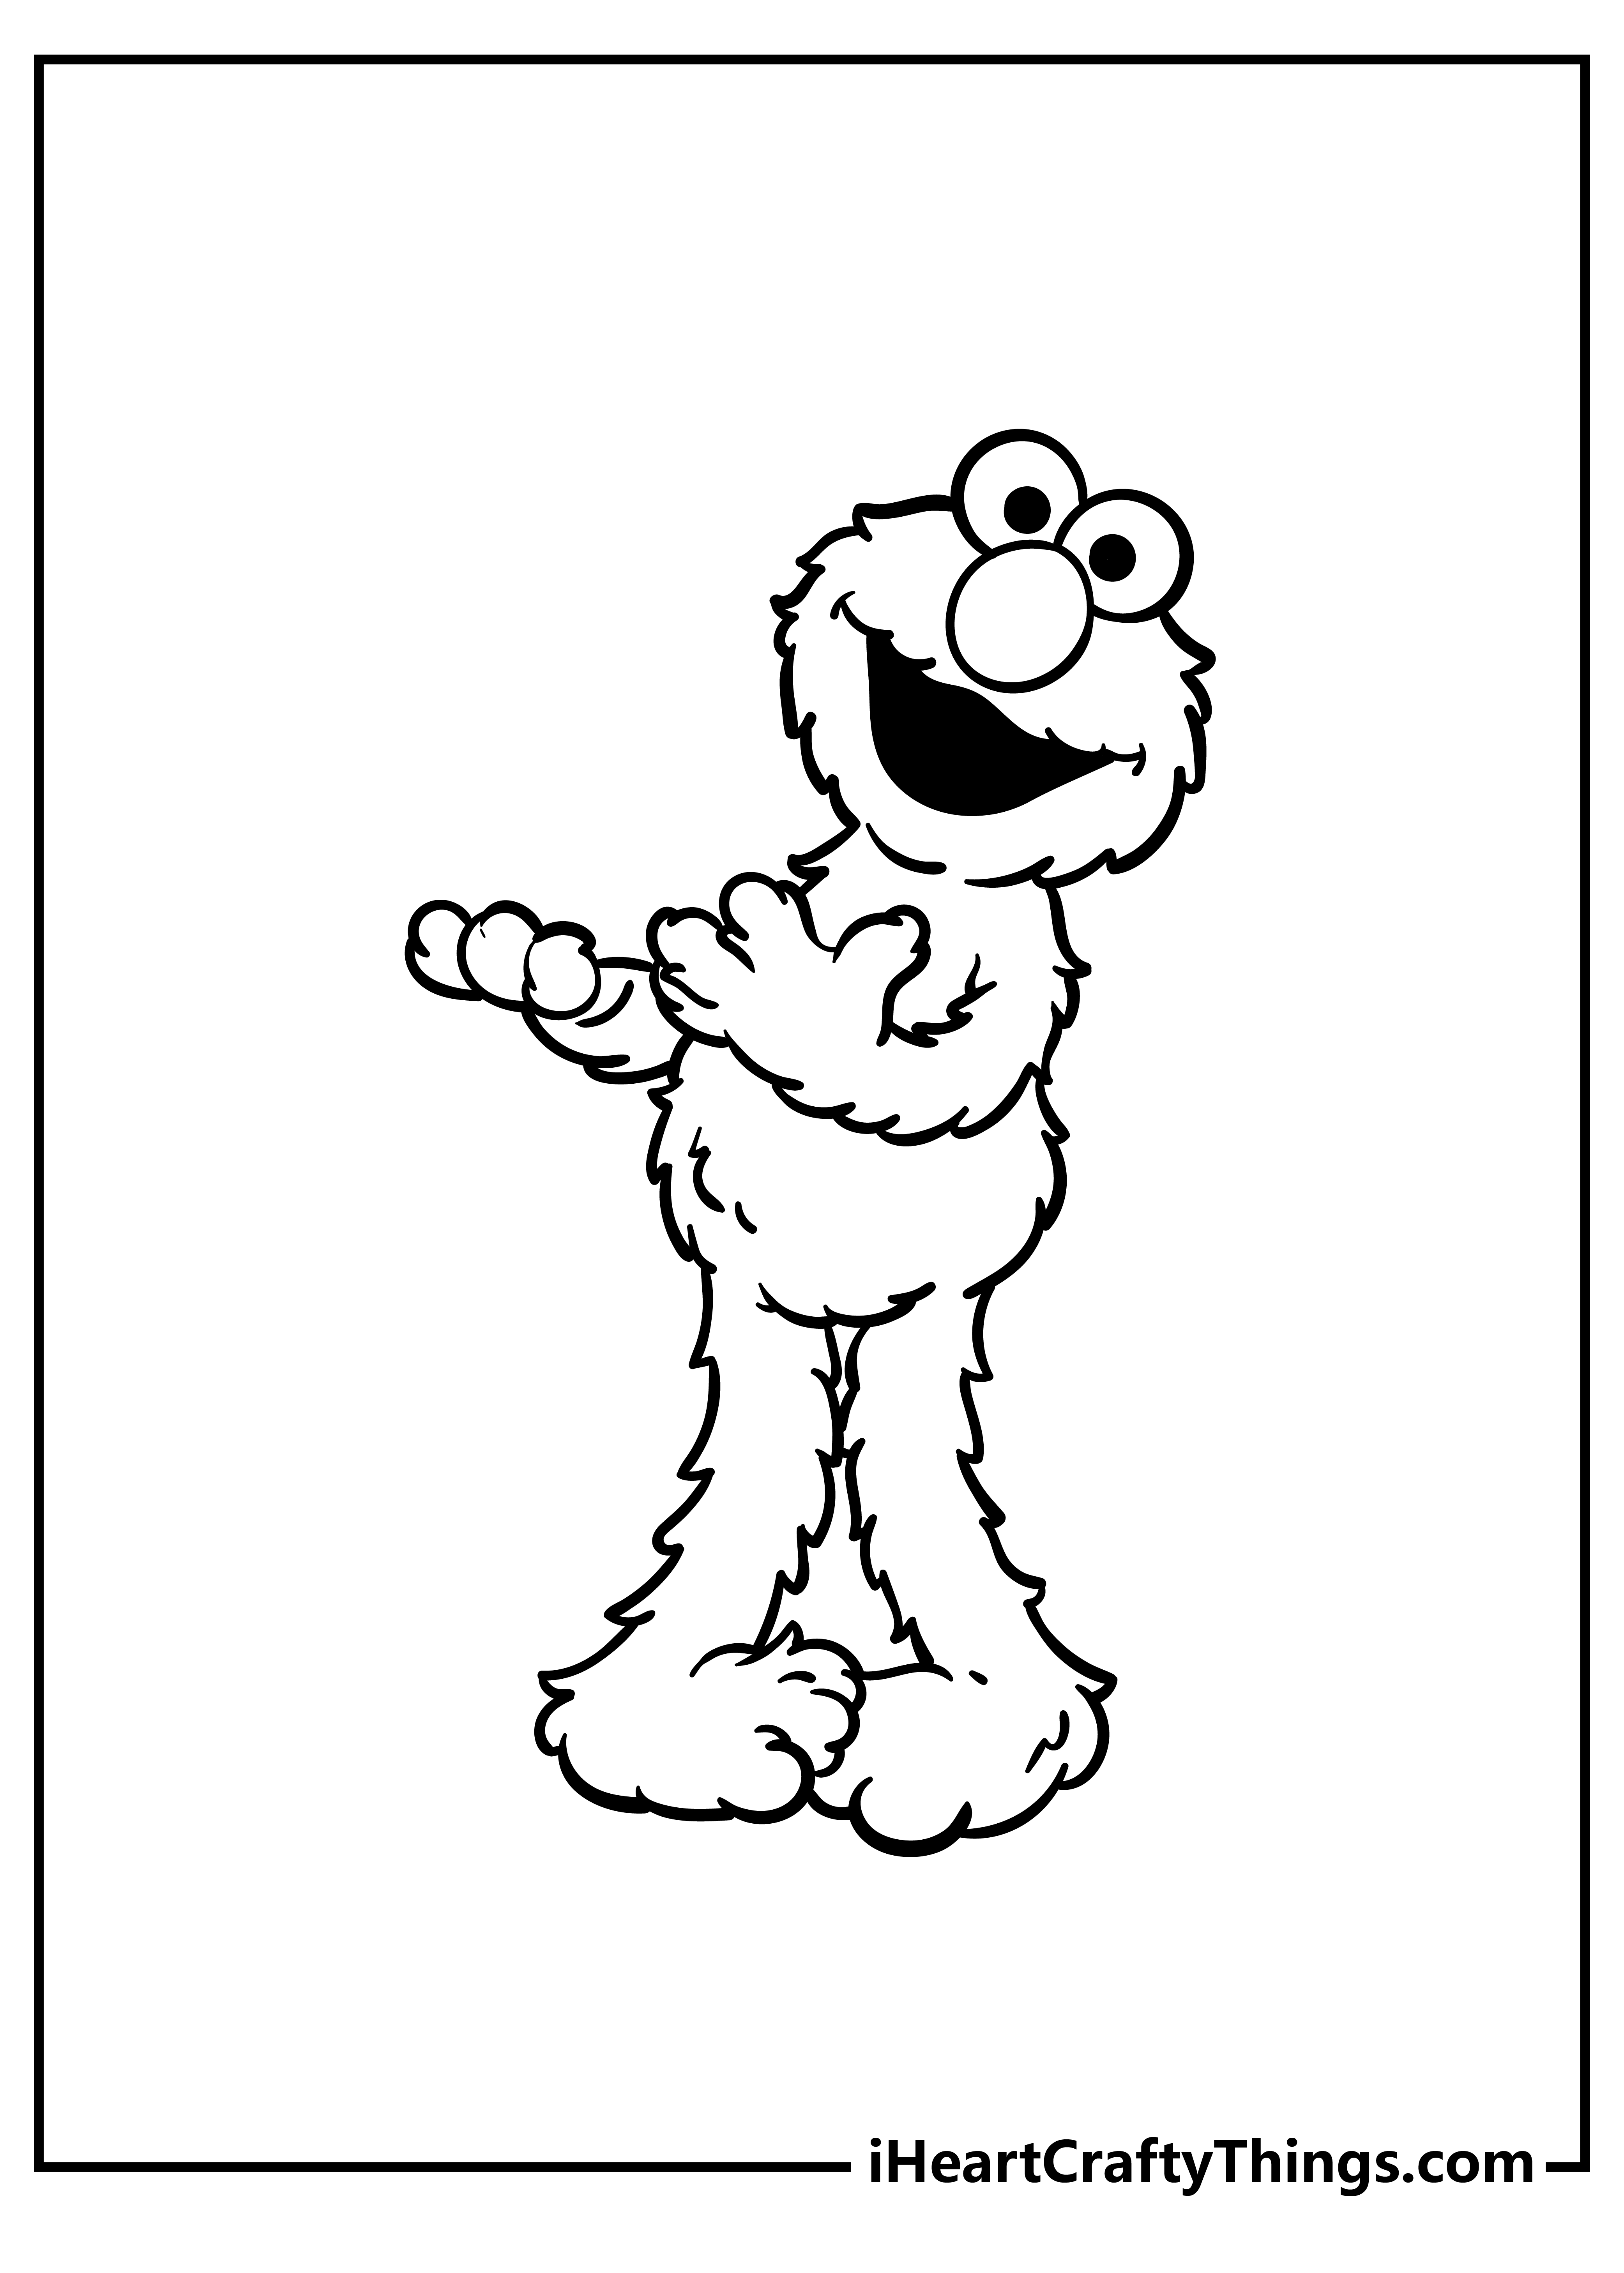 Elmo coloring pages free printables